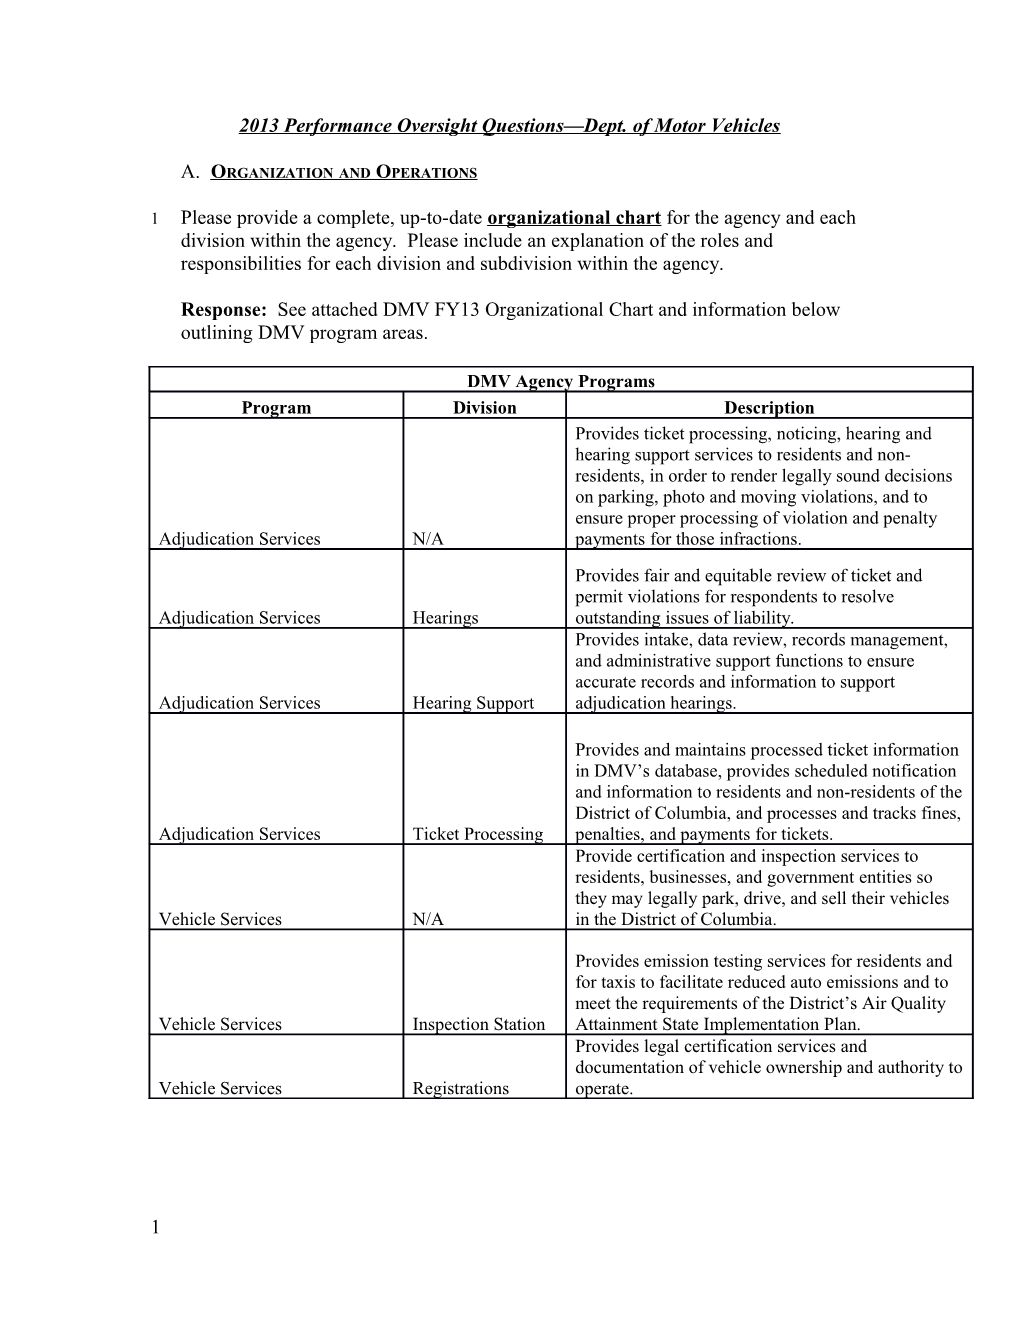 2013 Performance Oversight Questions Dept. of Motor Vehicles